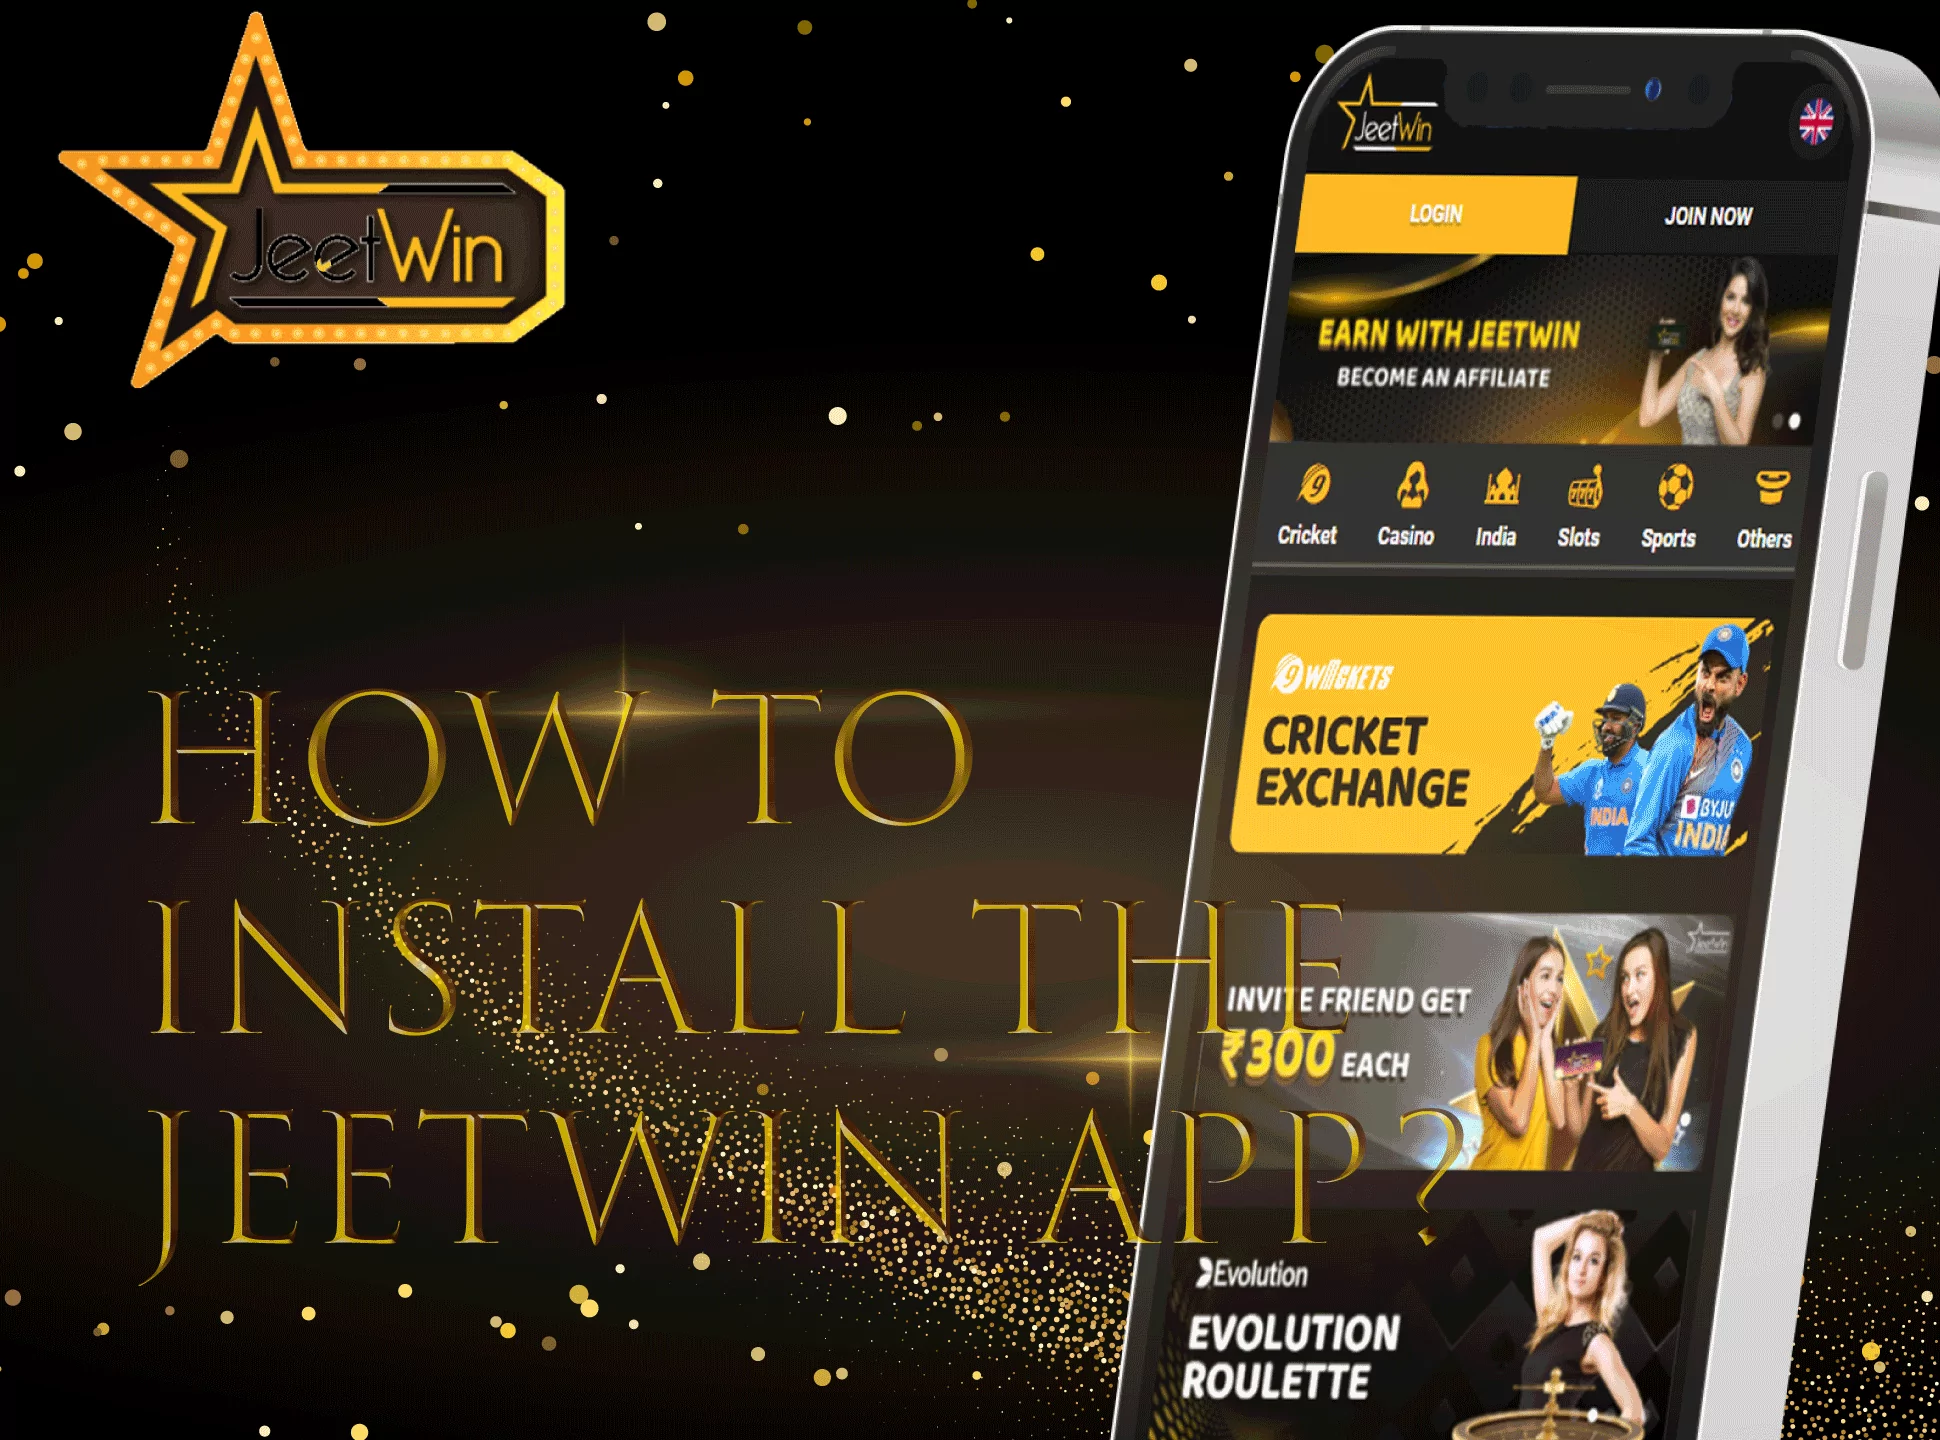 Go to the Jeetwin website, download the apk file and install the app.